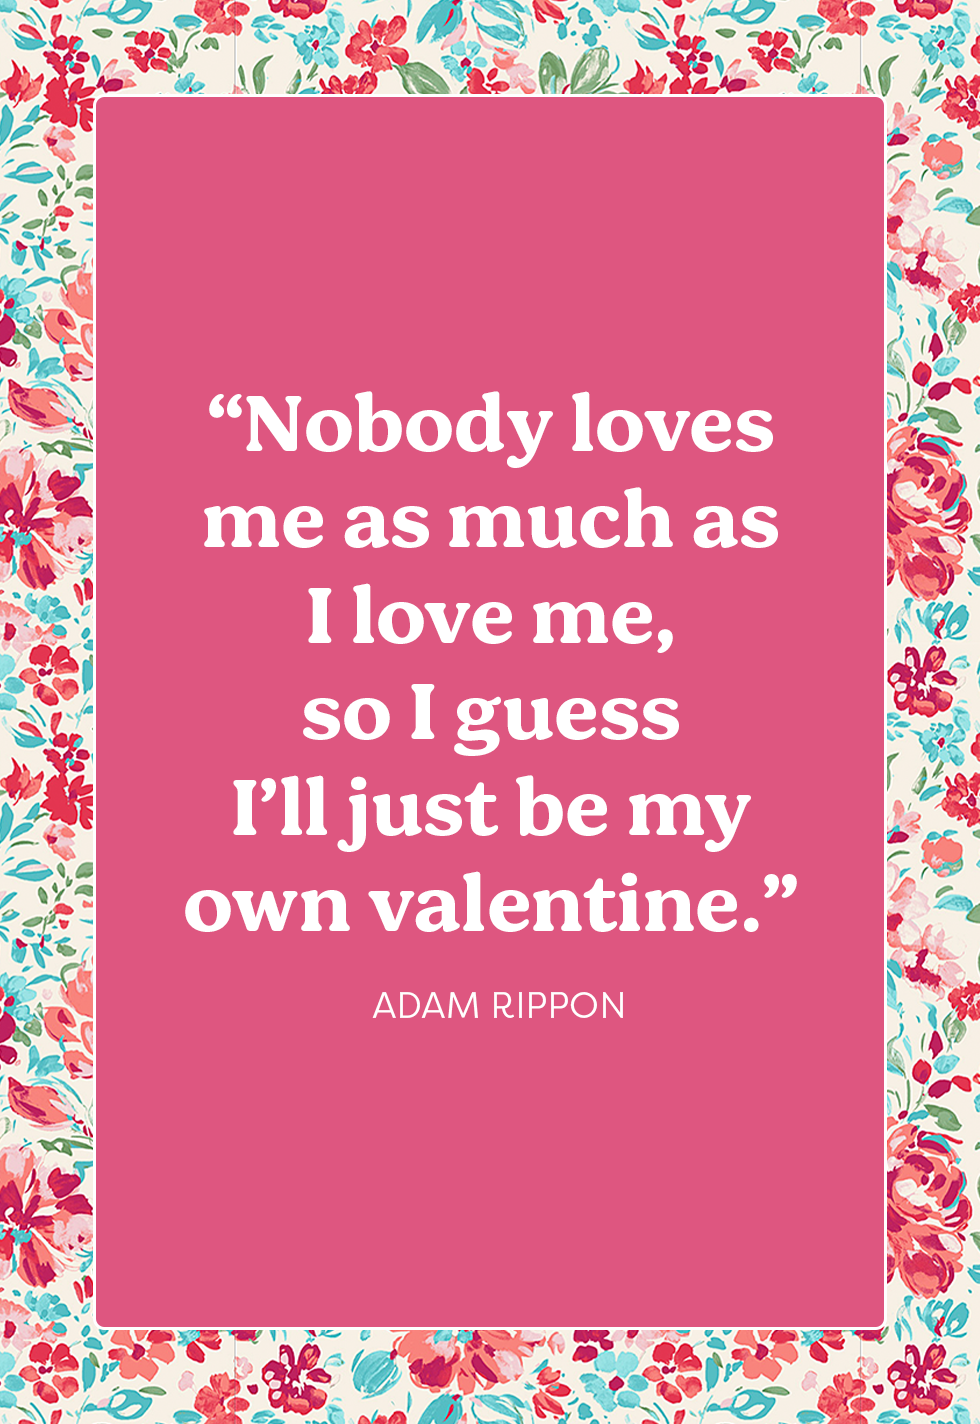 60 Funny Valentine's Day Quotes - Funny Love Sayings